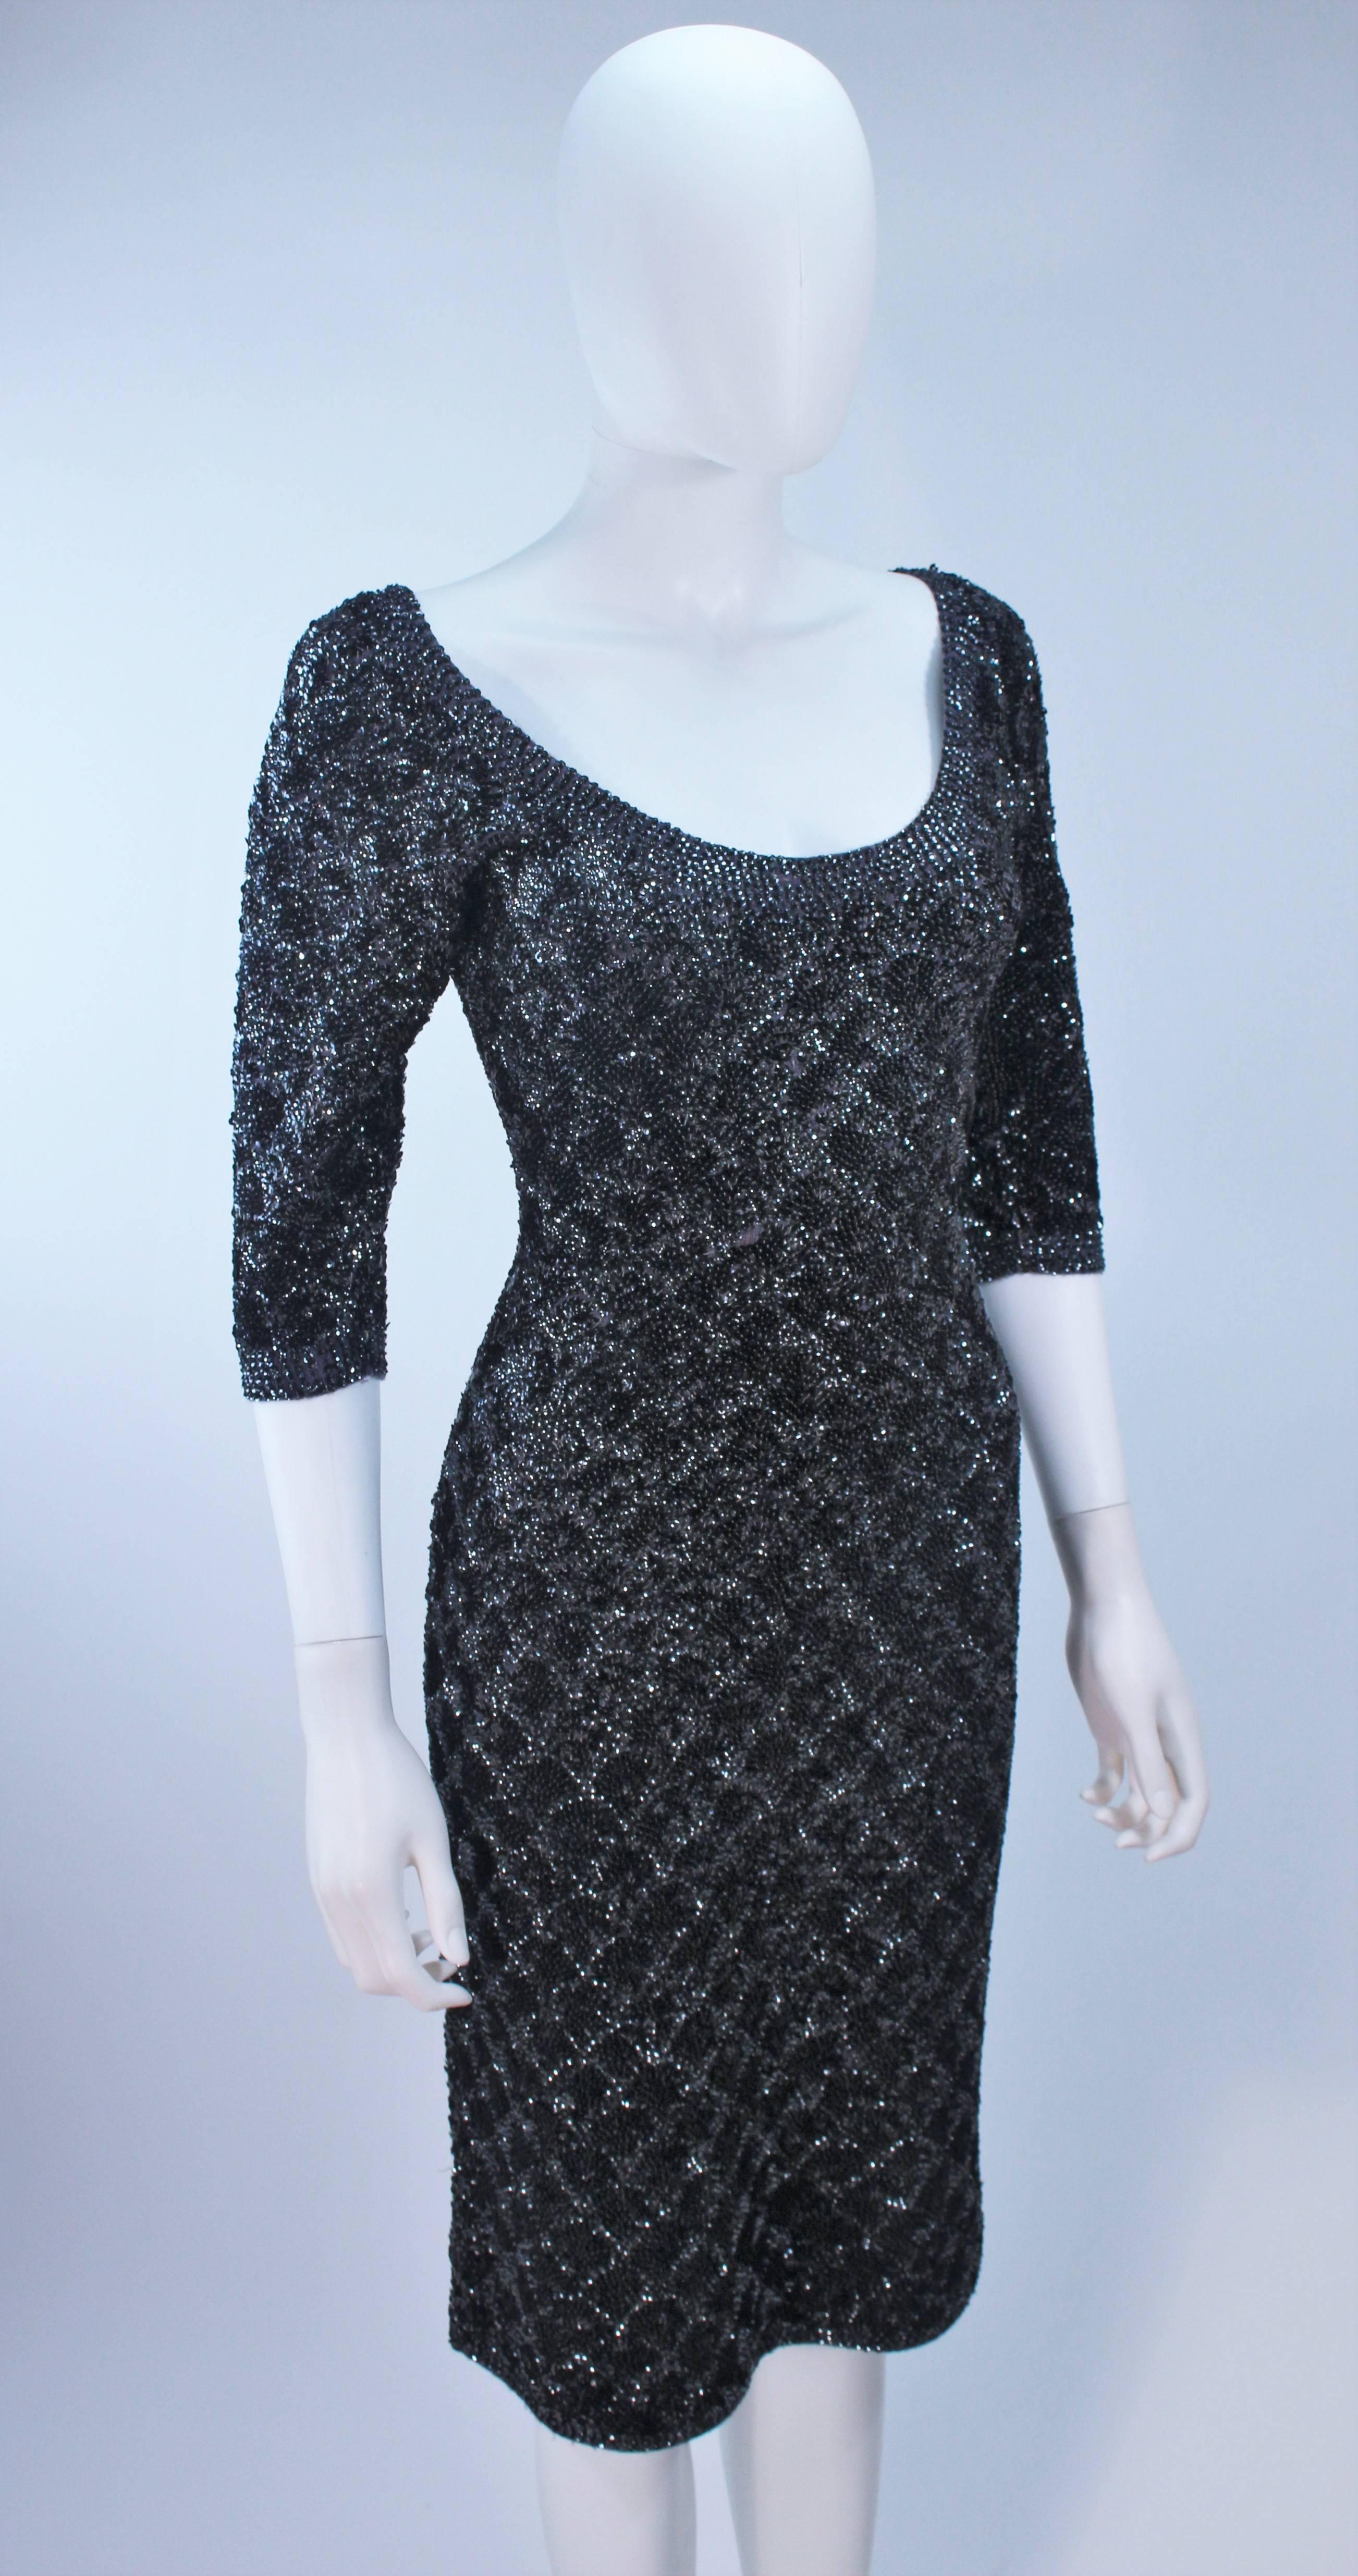 SYDNEY'S BEVERLY HILLS Black & Gunmetal Metallic Stretch Knit Cocktail Dress 4 6 In Excellent Condition For Sale In Los Angeles, CA